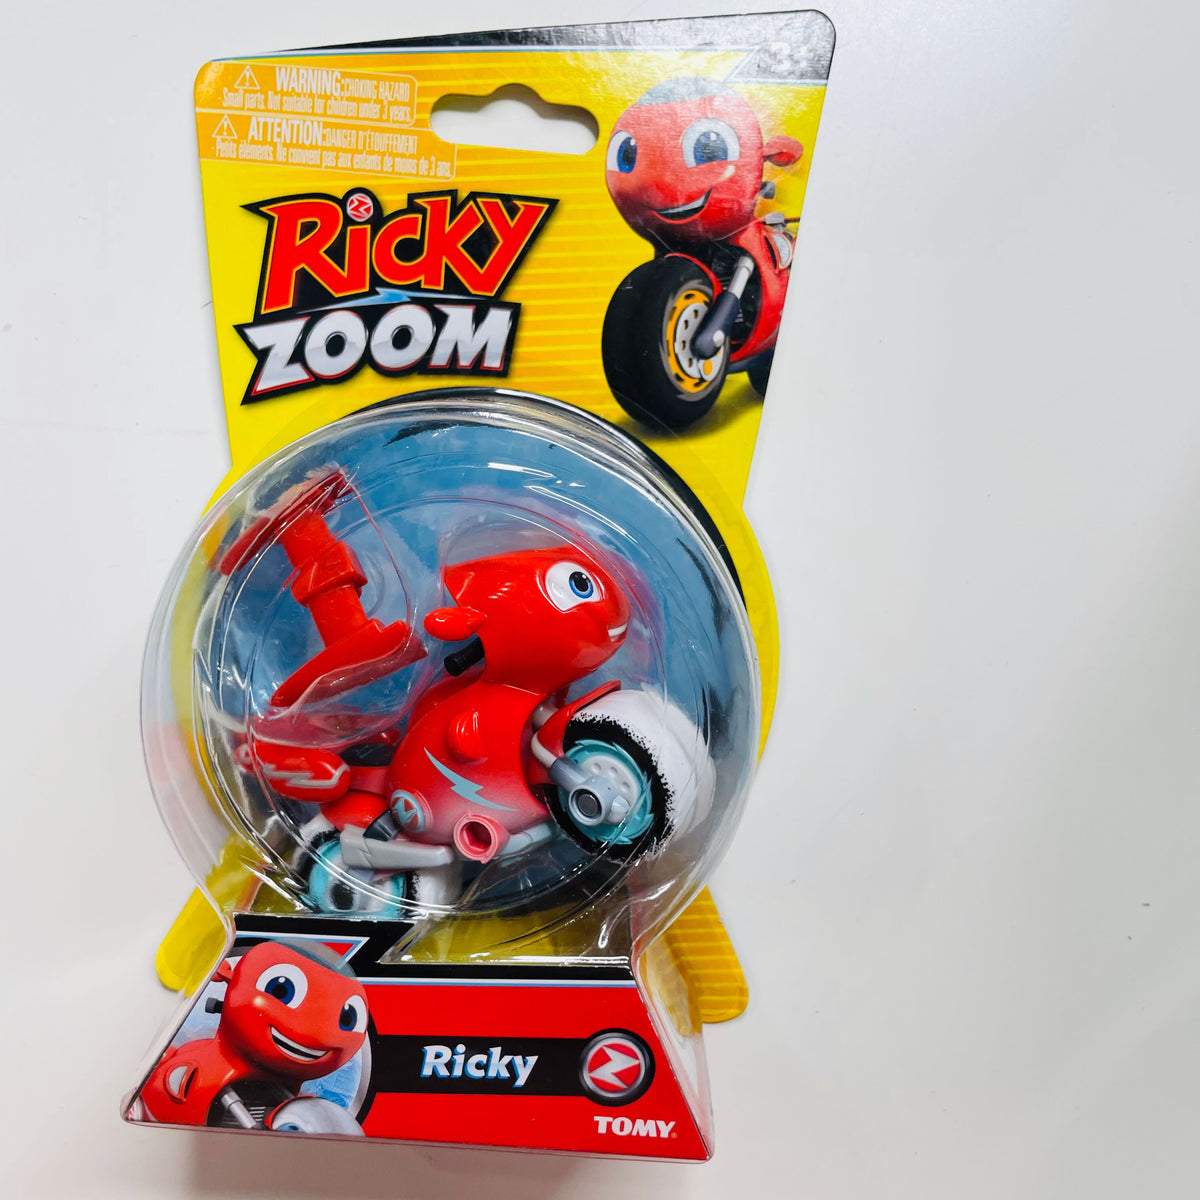 Ricky Zoom Toy Motorcycle with Light and Sounds Fast Same Day Shipping Nice